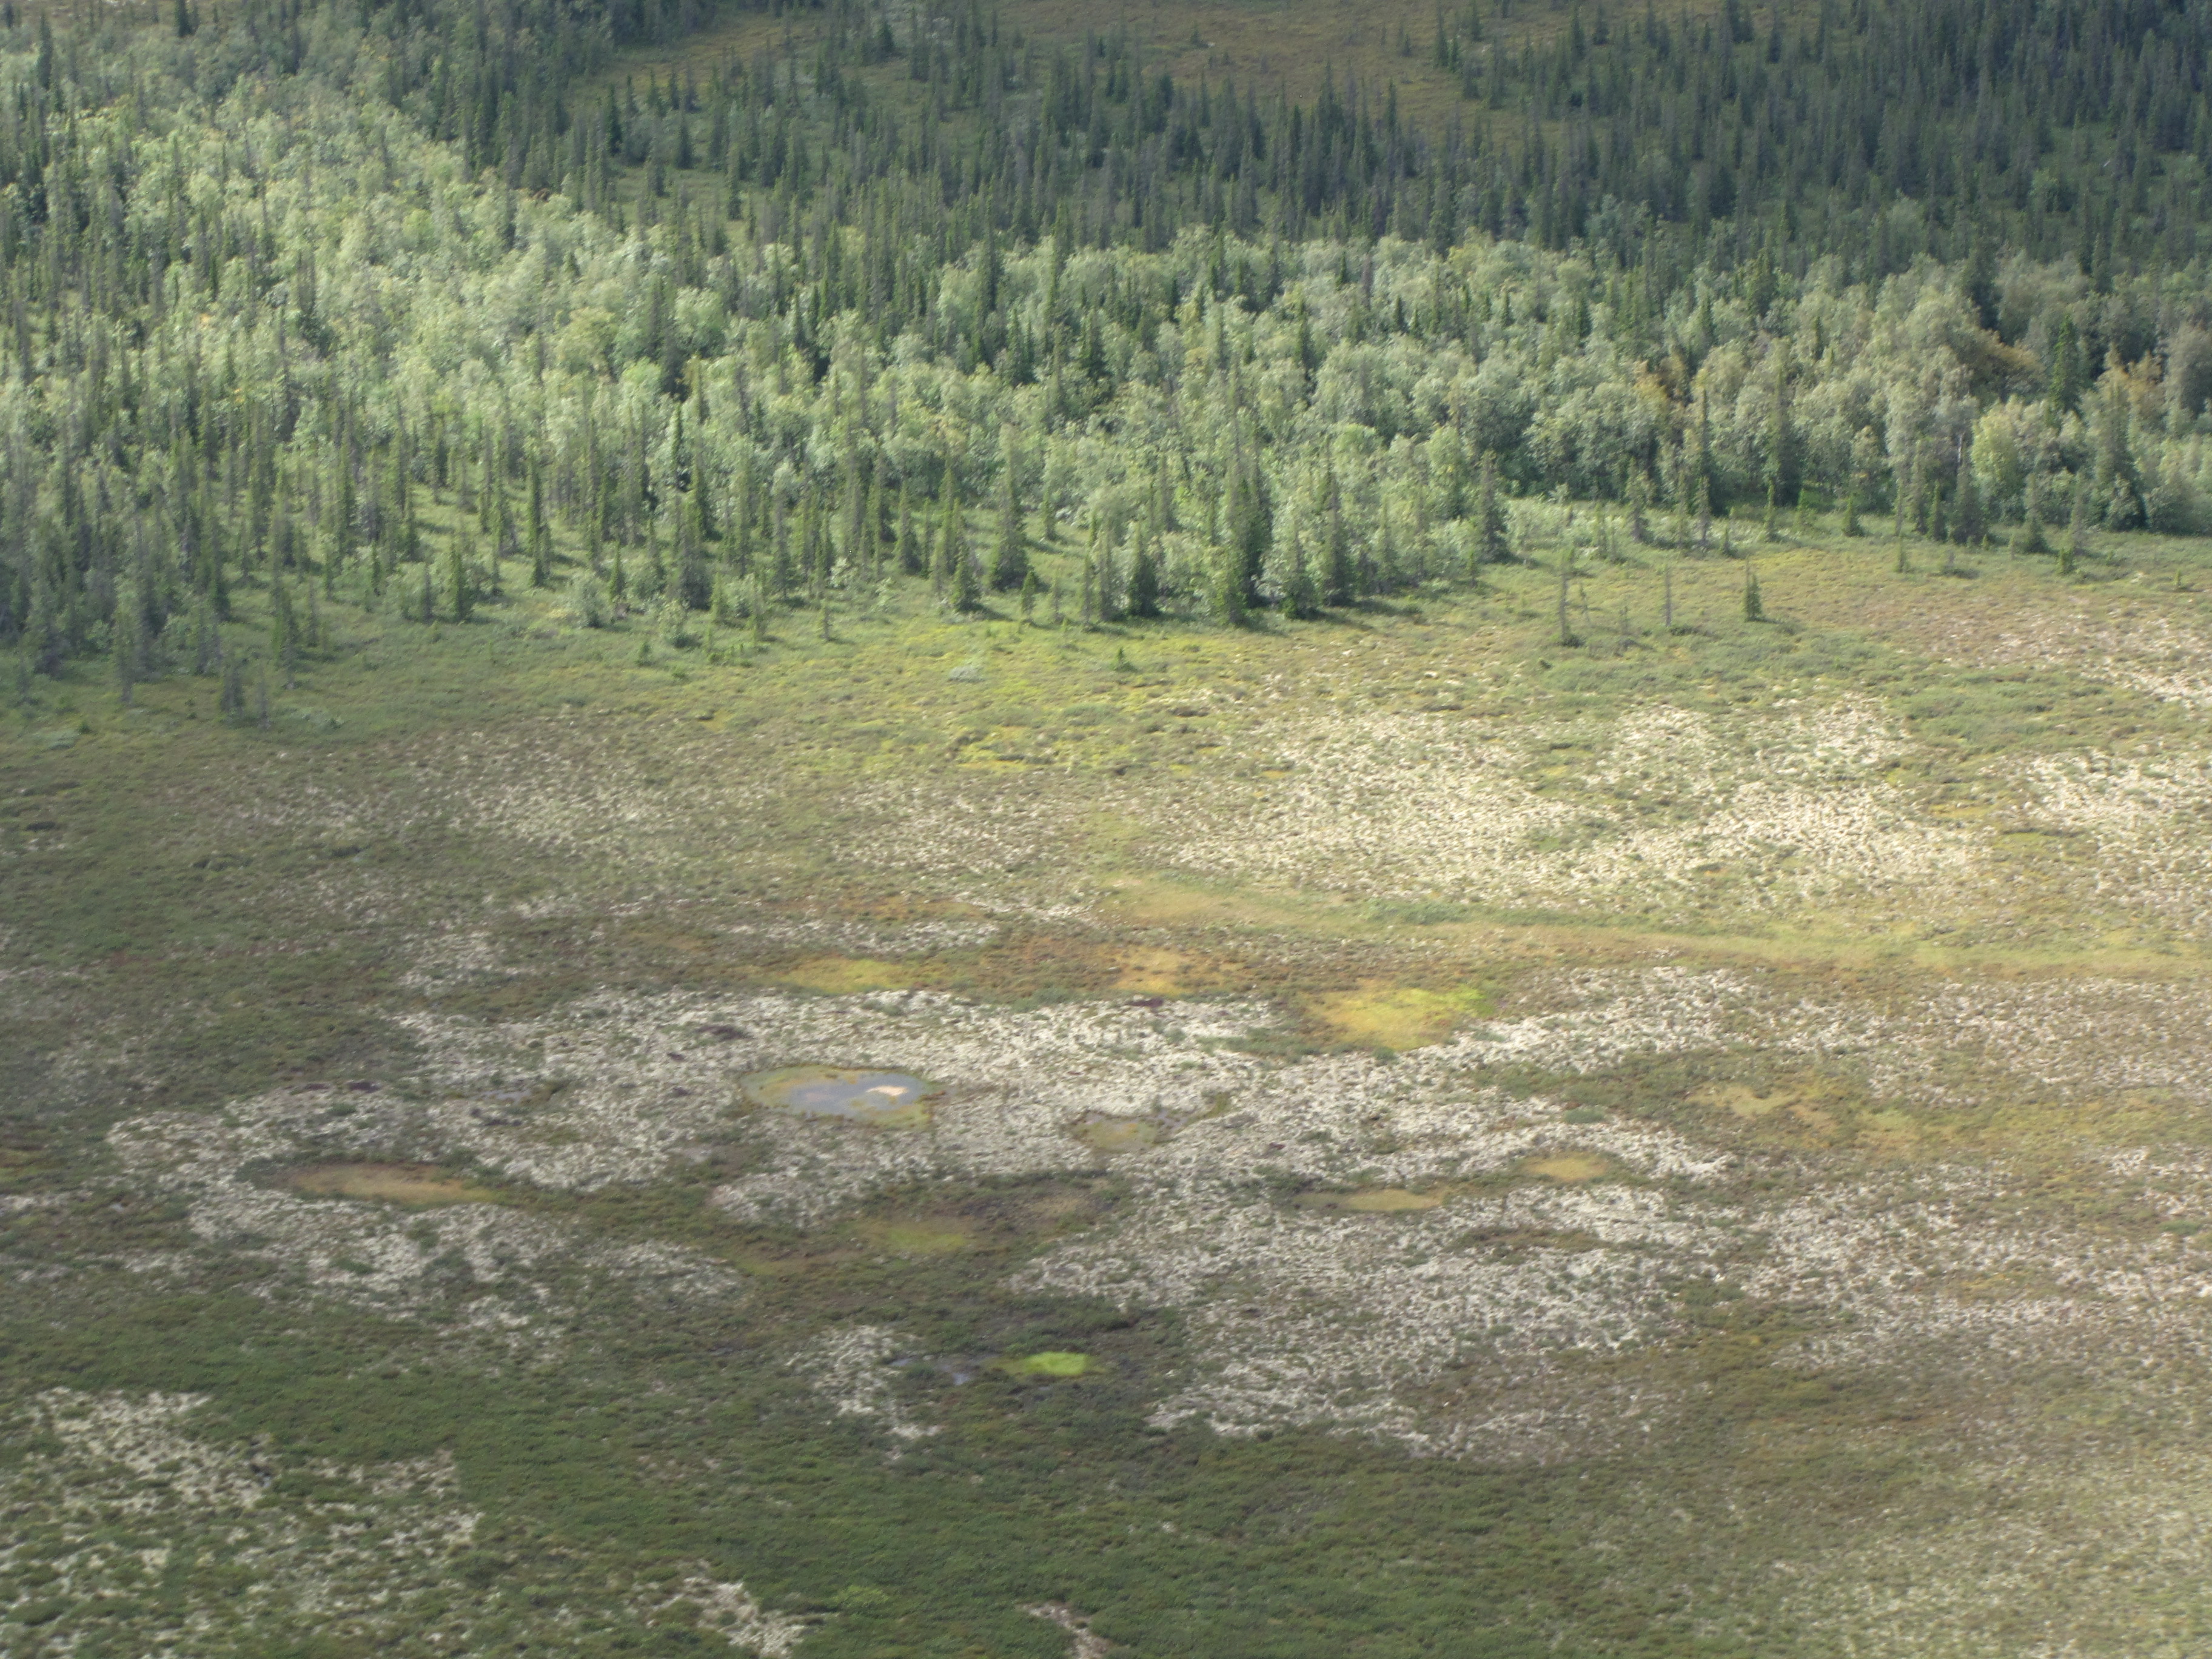 Forest-tundra transition boundary from Russia. Understanding the dynamics of such ecological boundaries from the long-term ecological record is a key goal for this working group. Photo: Jesse Morris.